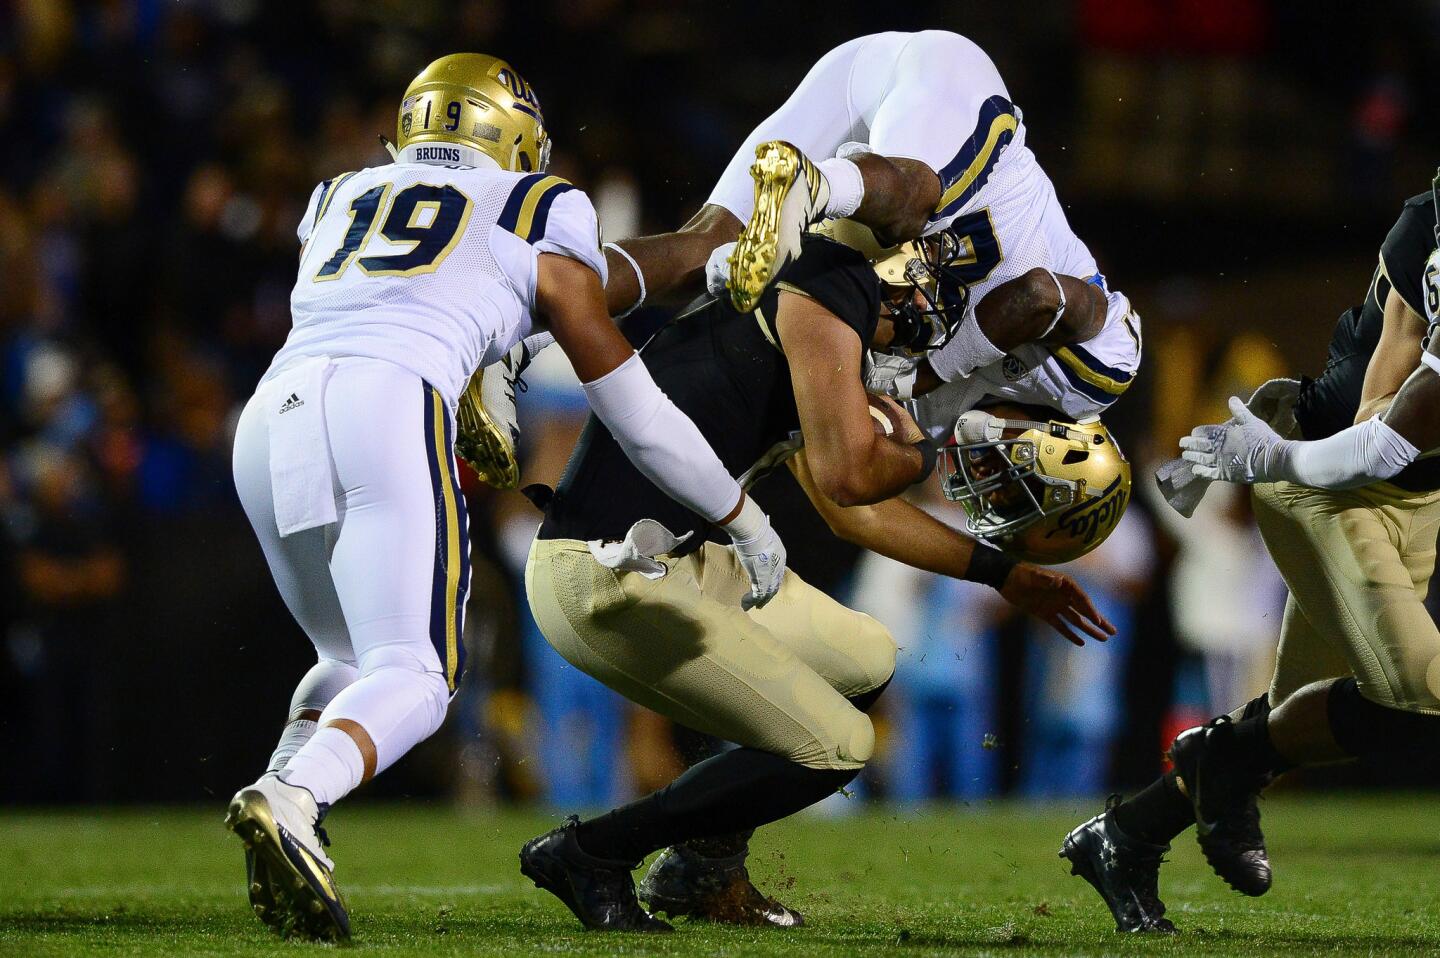 UCLA defensive back Tahaan Goodman leaps on top of Sefo Liufau as the Colorado quarterback runs for a gain during the first quarter.